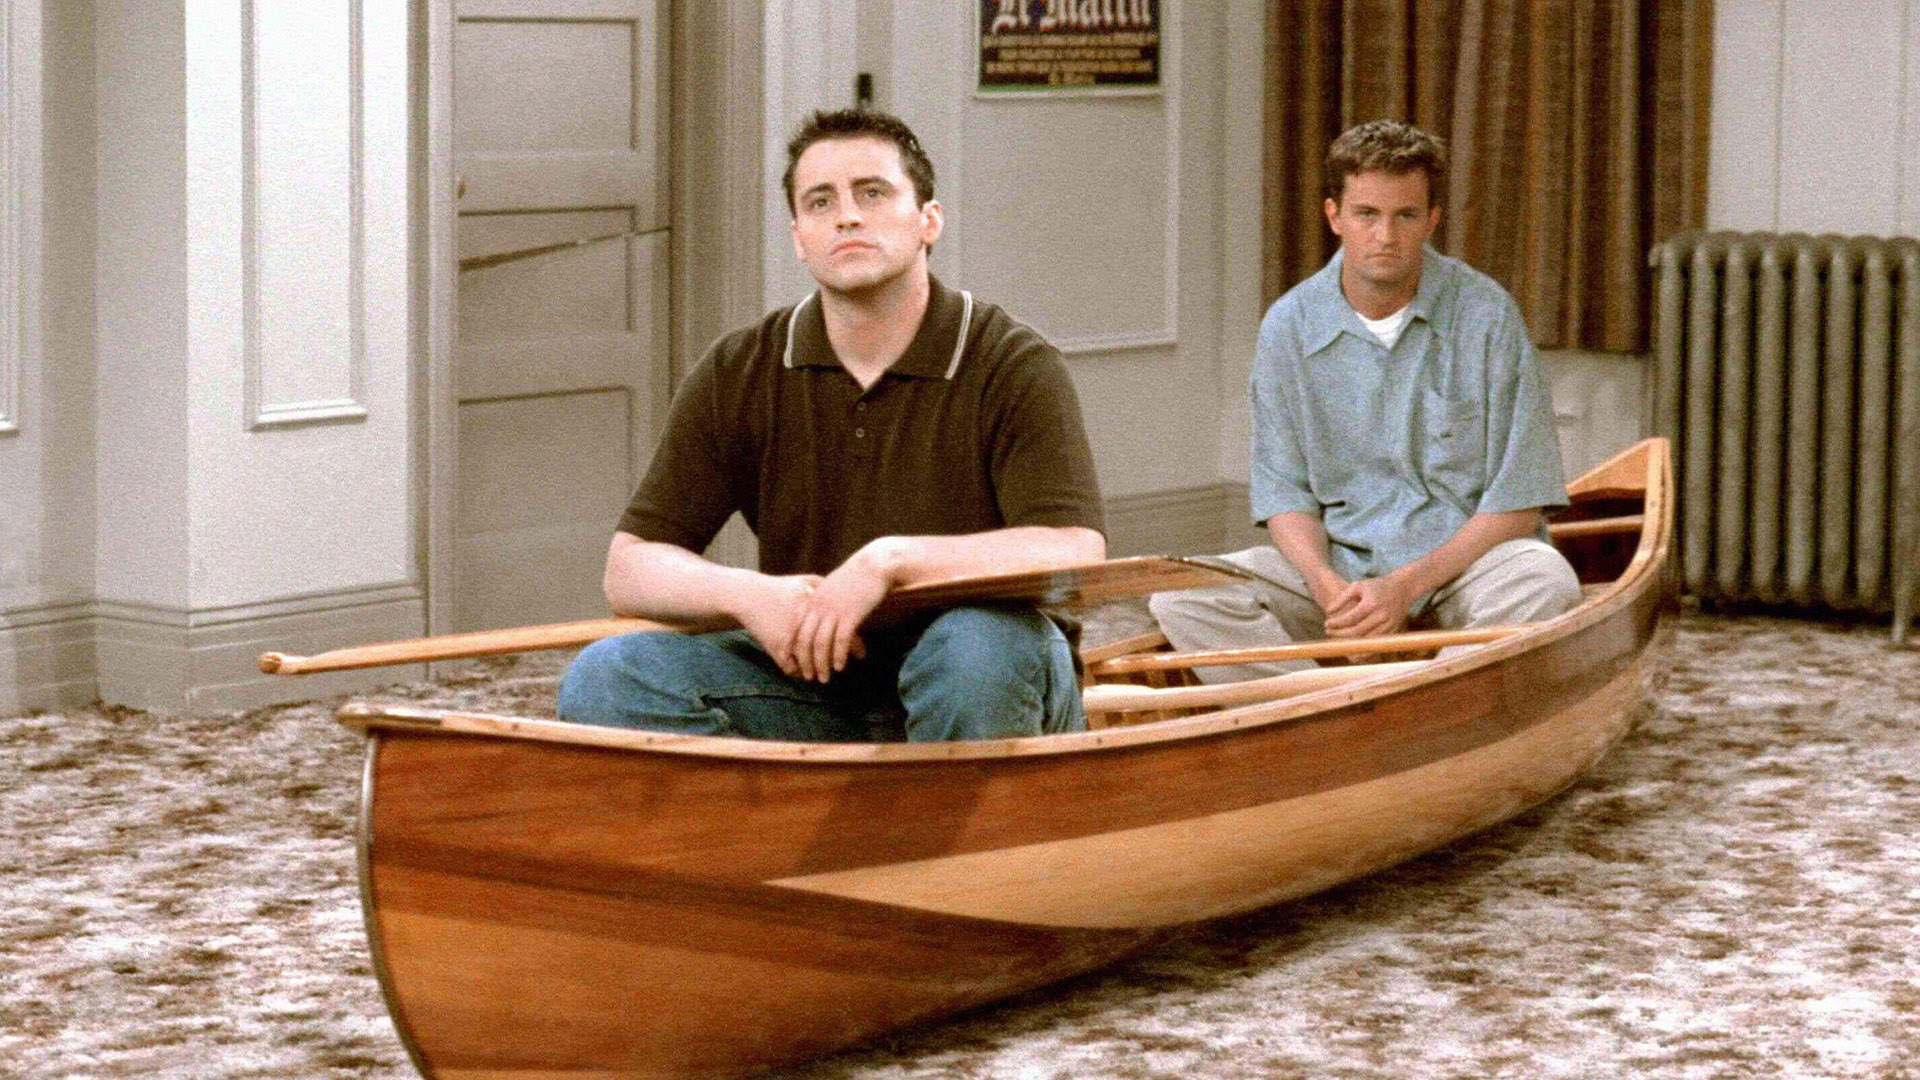 7 Obscure Sitcoms You Haven't Watched Yet – But Should if You're Tired of Friends